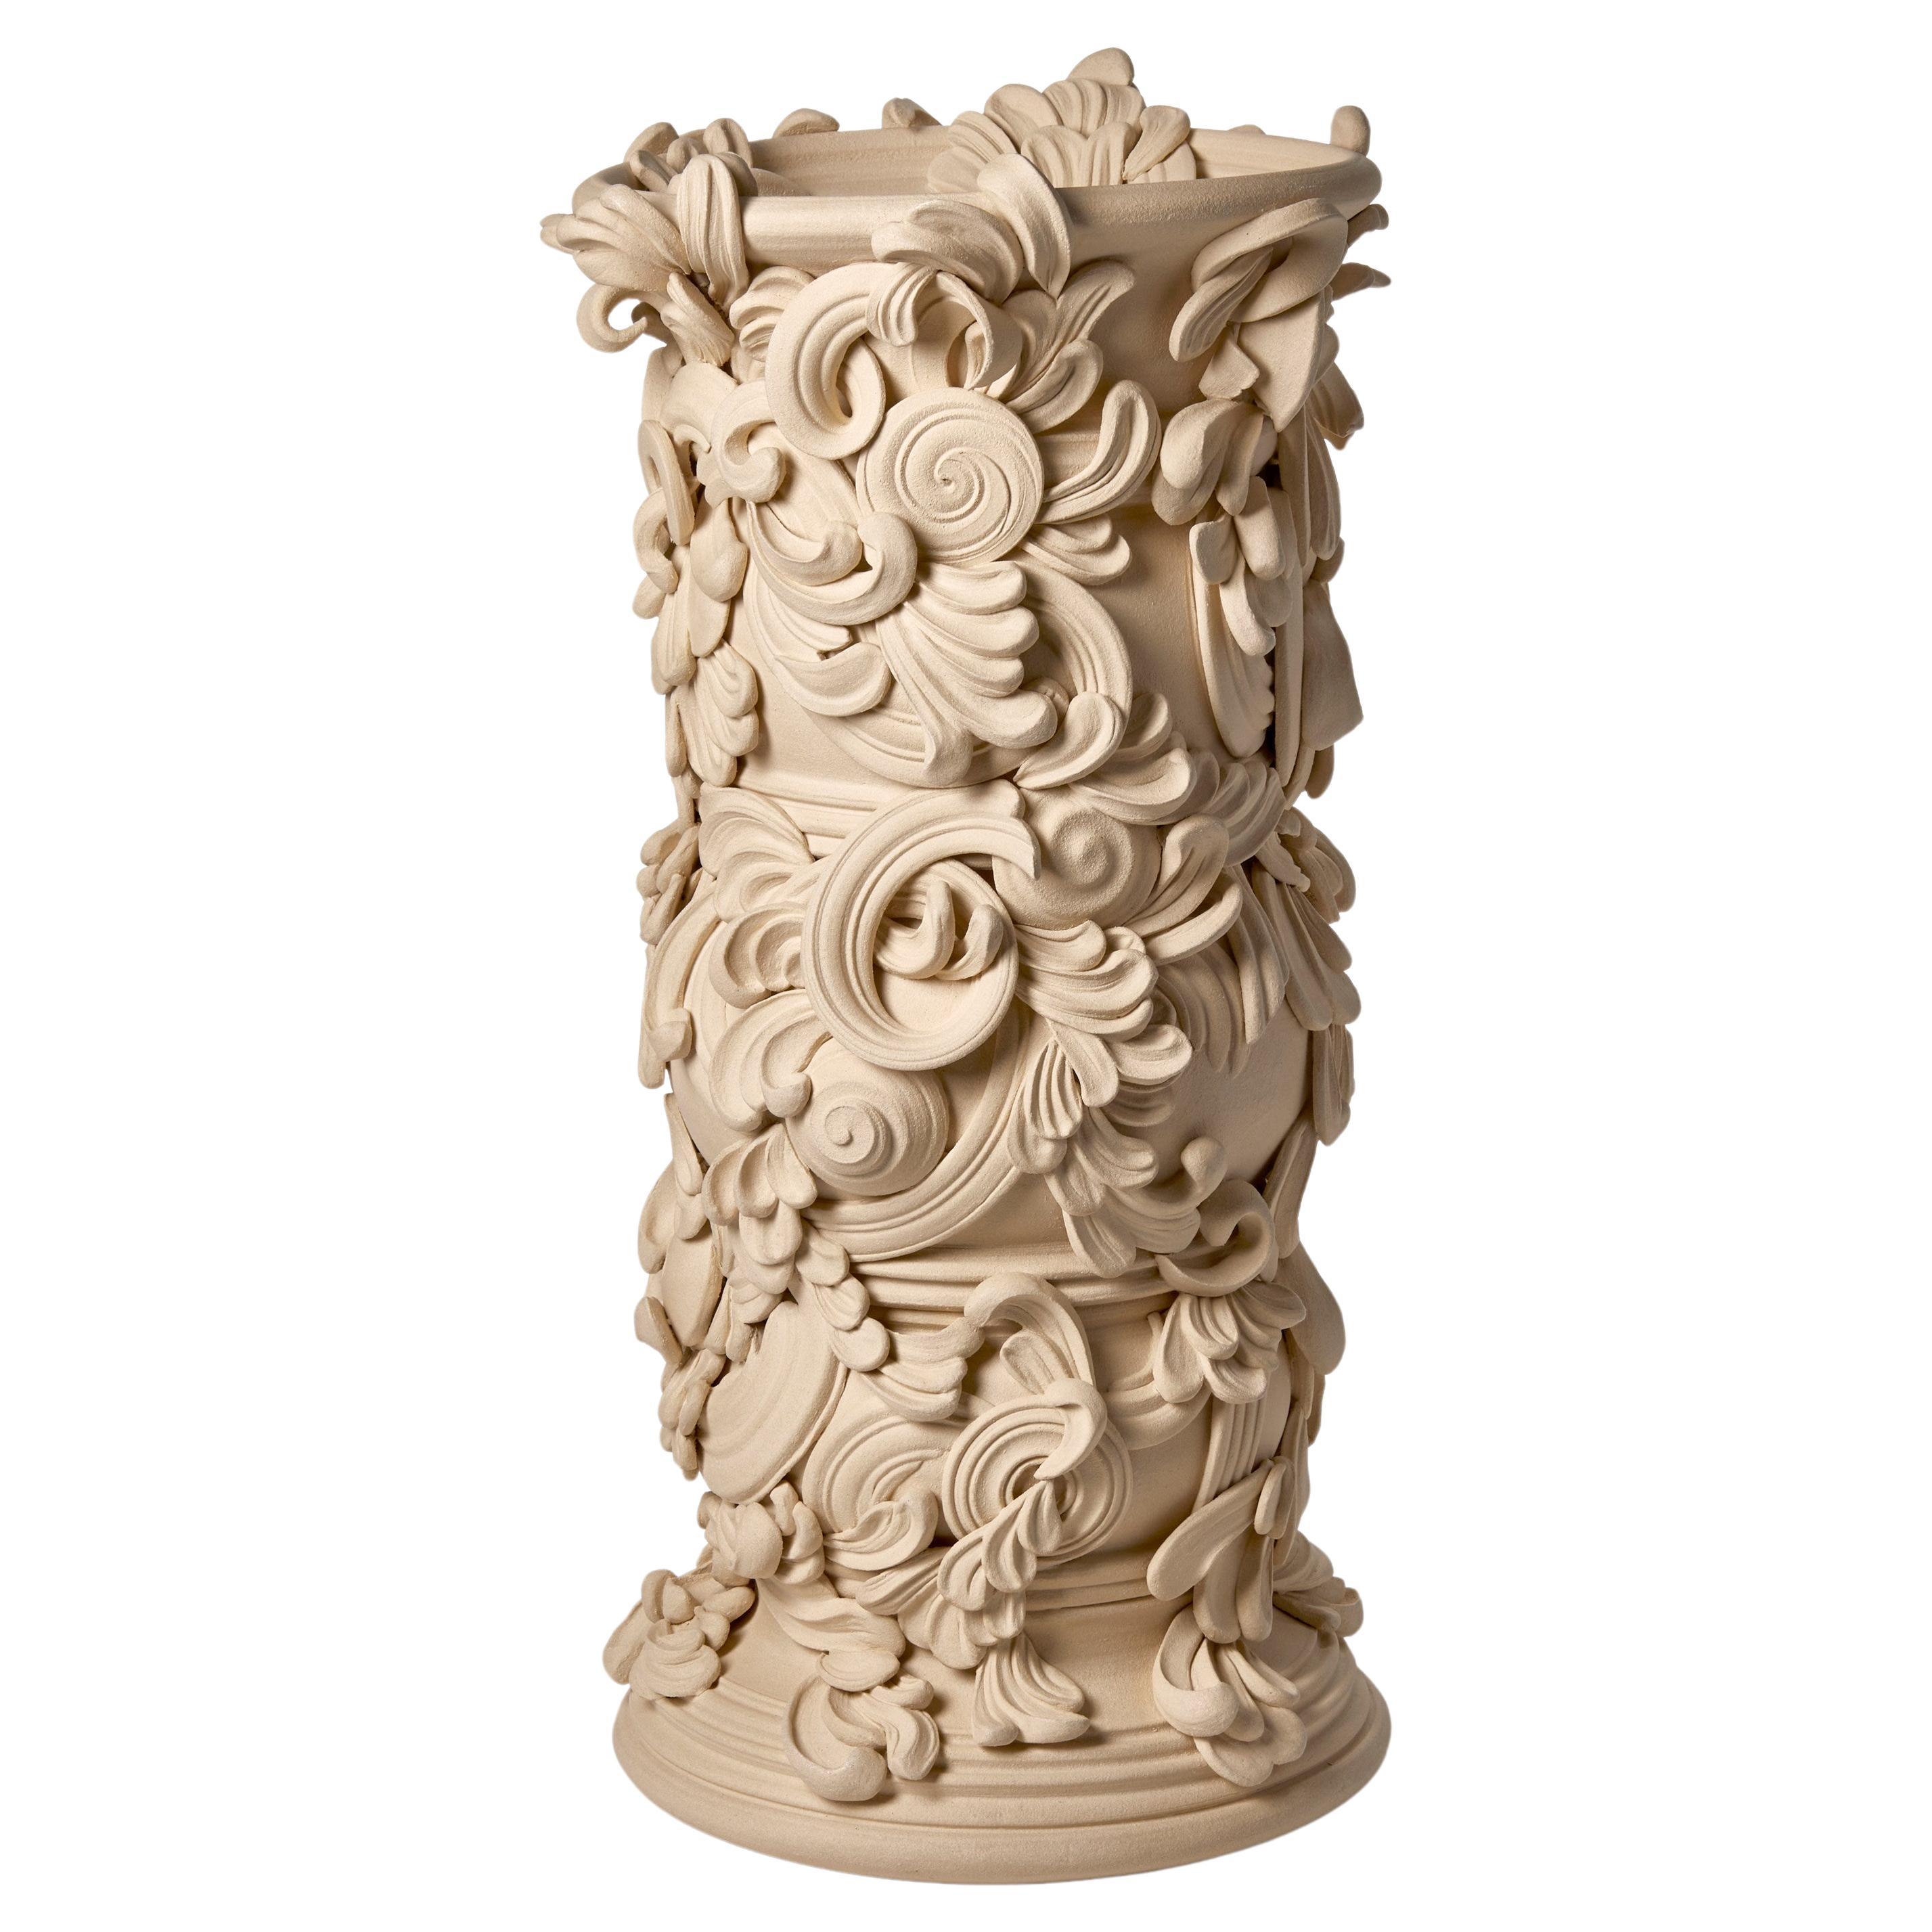 Gyratory II, a ceramic vessel inspired by rococo architecture by Jo Taylor